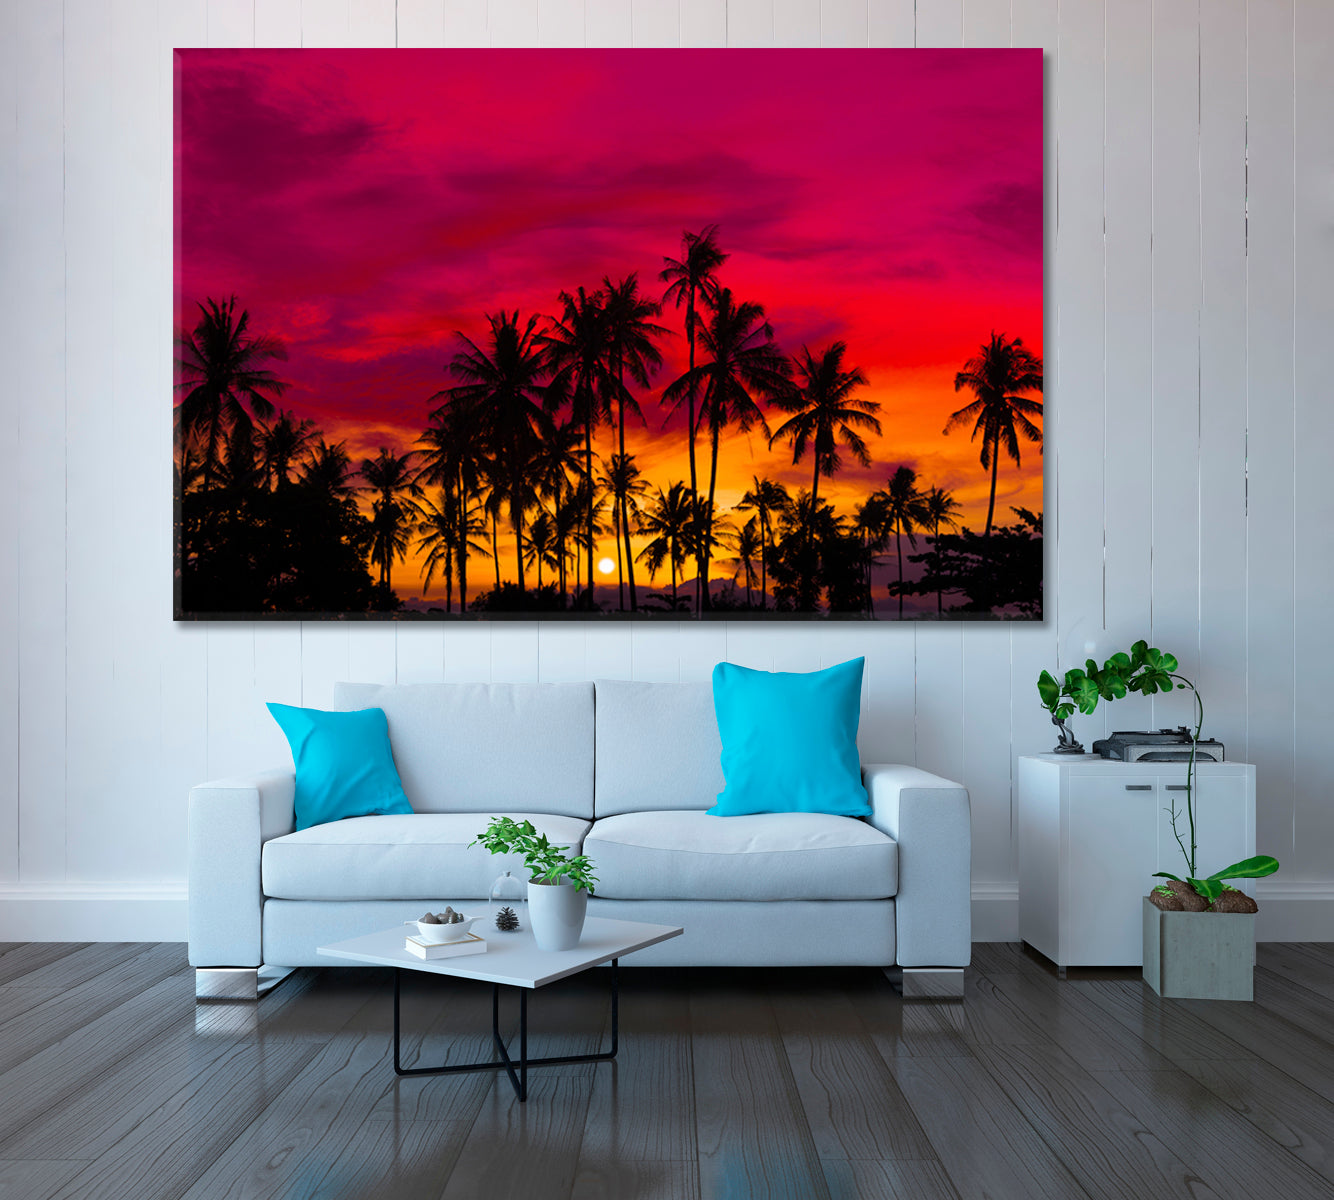 Coconut Palm Trees at Sunset Canvas Print ArtLexy 1 Panel 24"x16" inches 